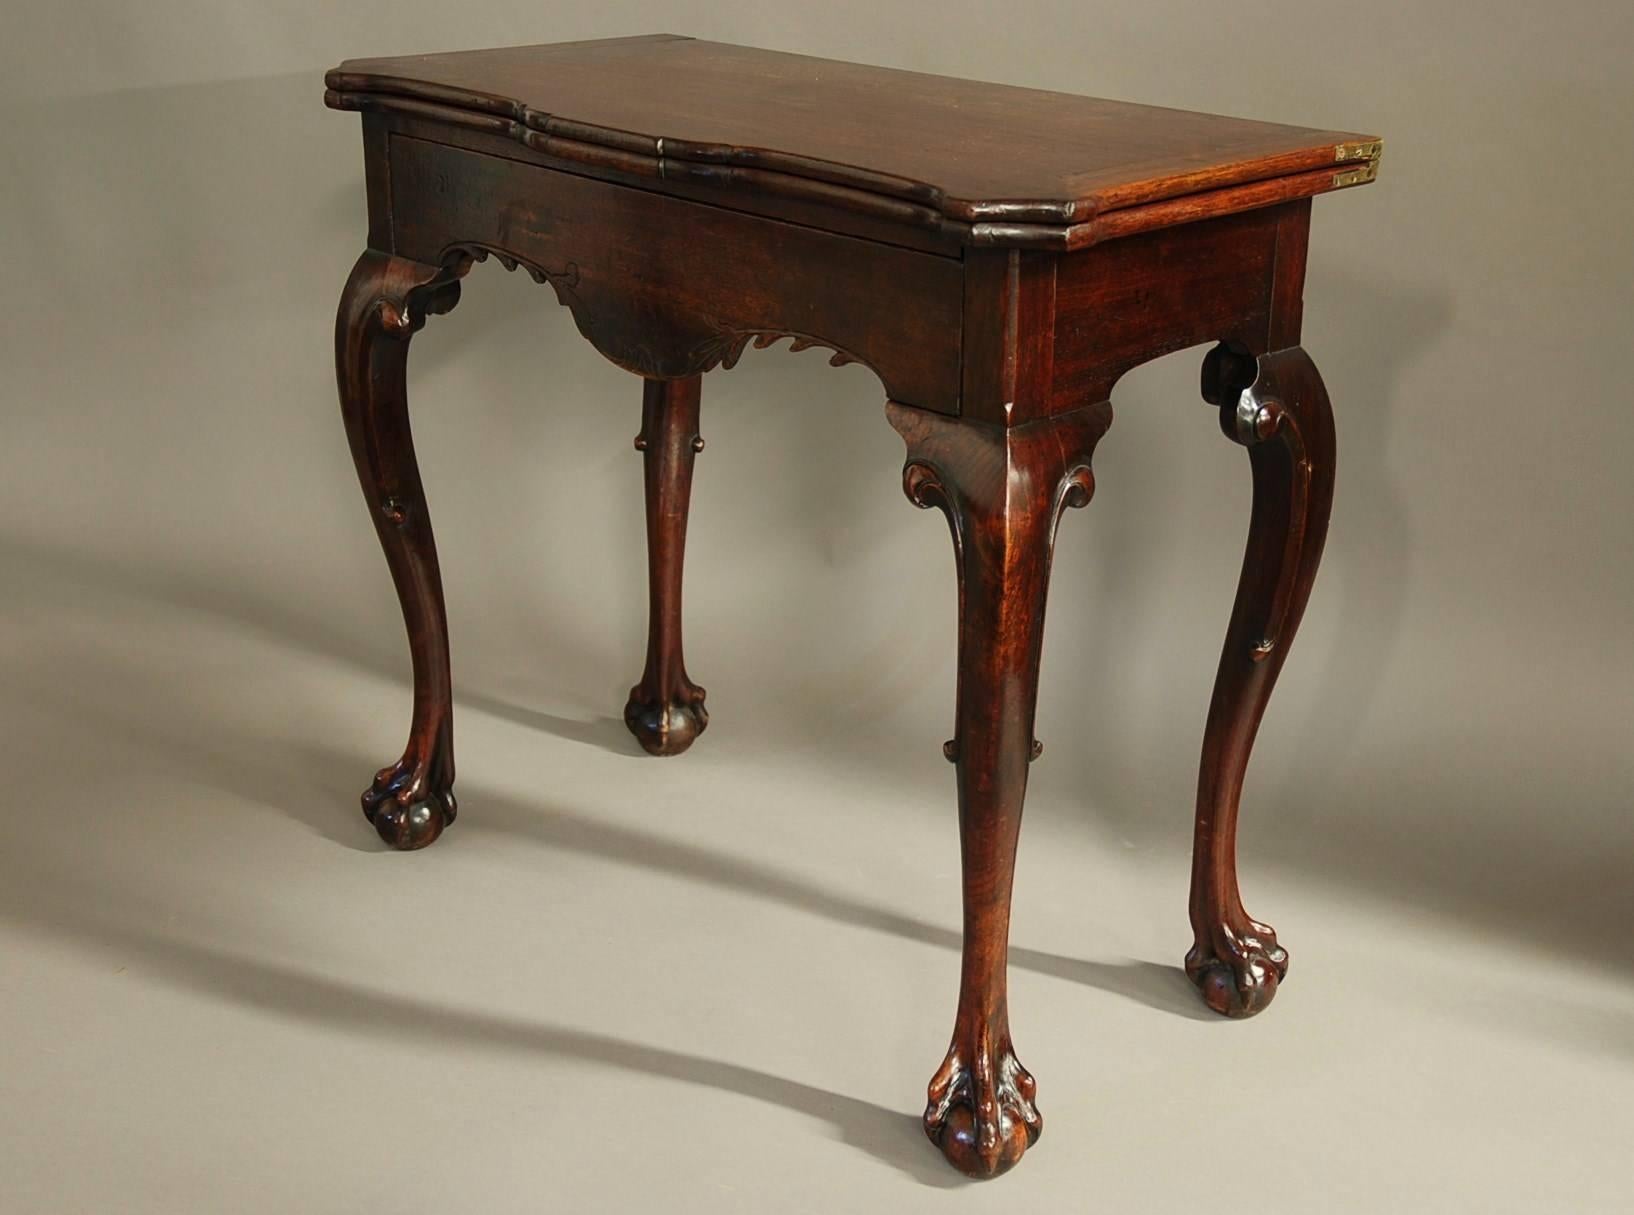 A rare and sophisticated mid-18th century Irish American black walnut tea table of superb, original patina and unusual inlaid bird decoration.

The top consists of a hinged opening top of block front form with shaped corners, the top being cleated